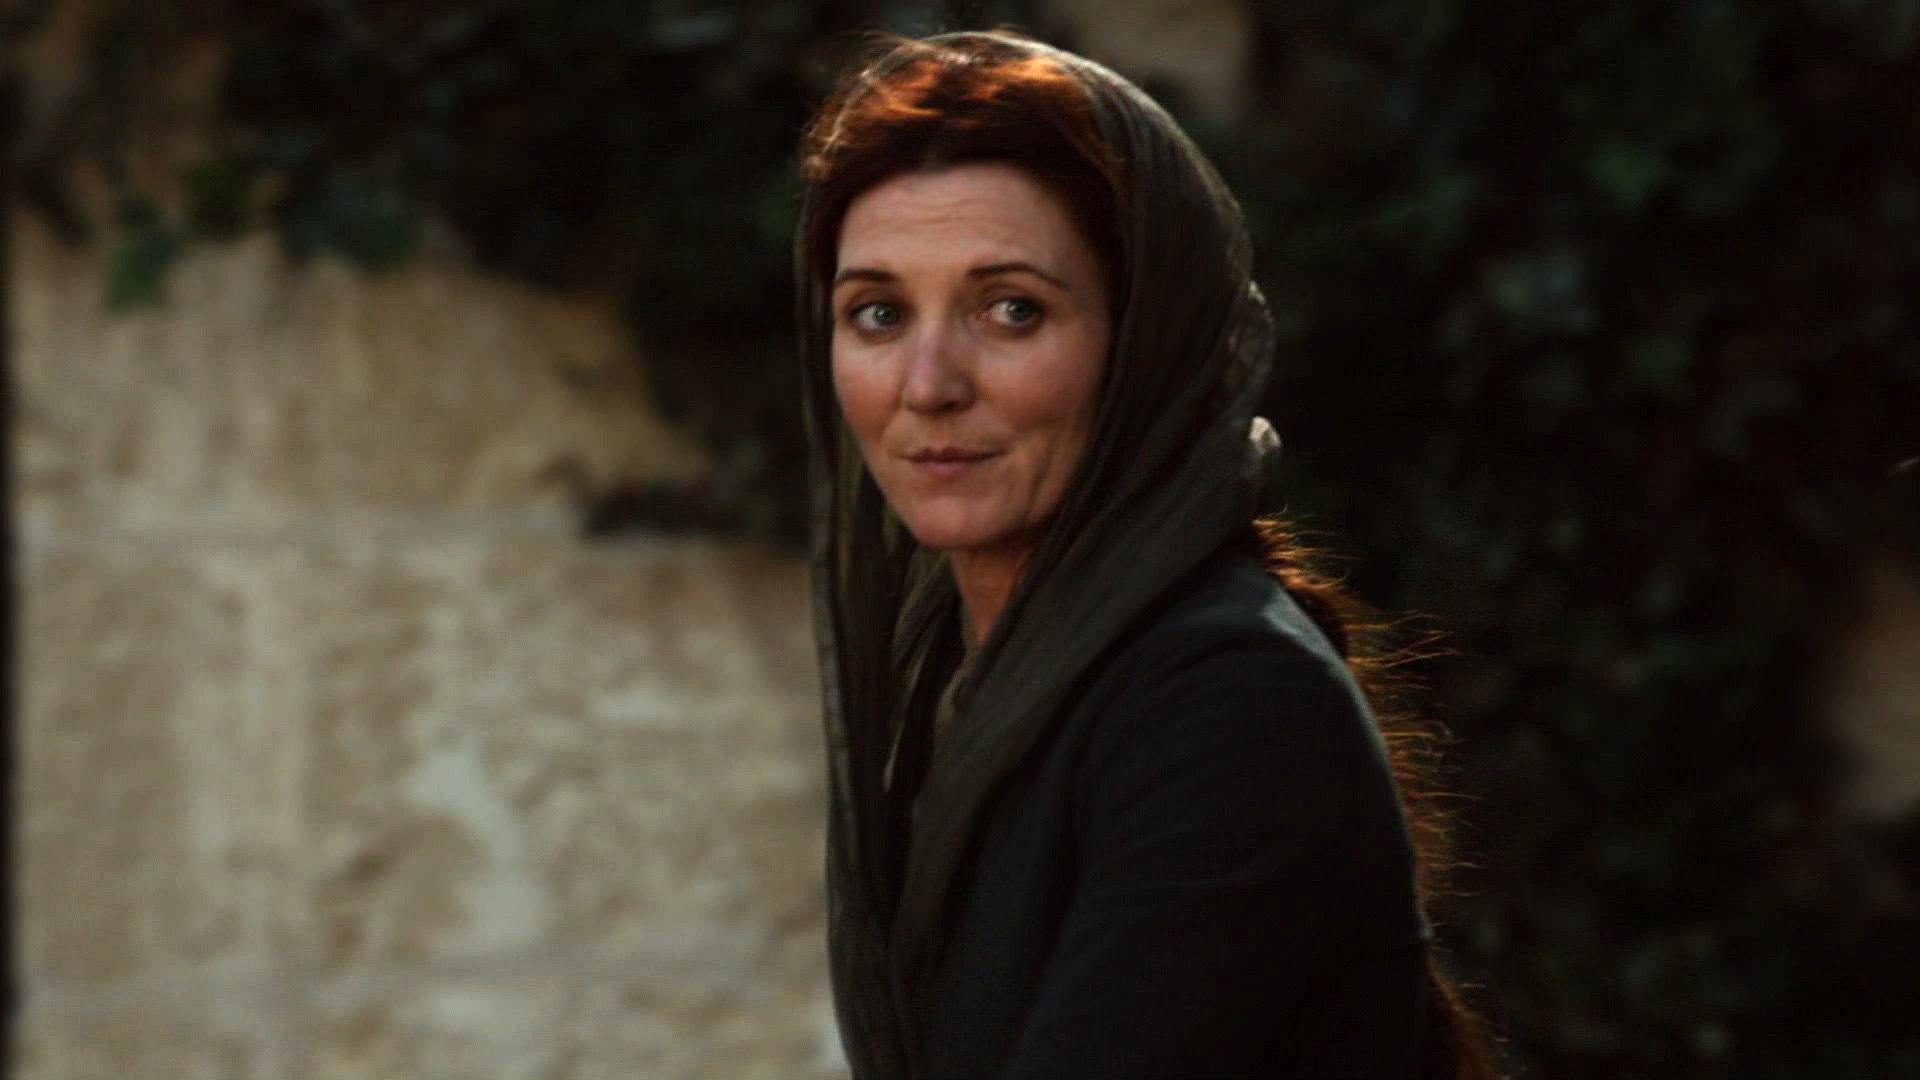 Michelle Fairley as Catelyn Stark on "Game of Thrones" |